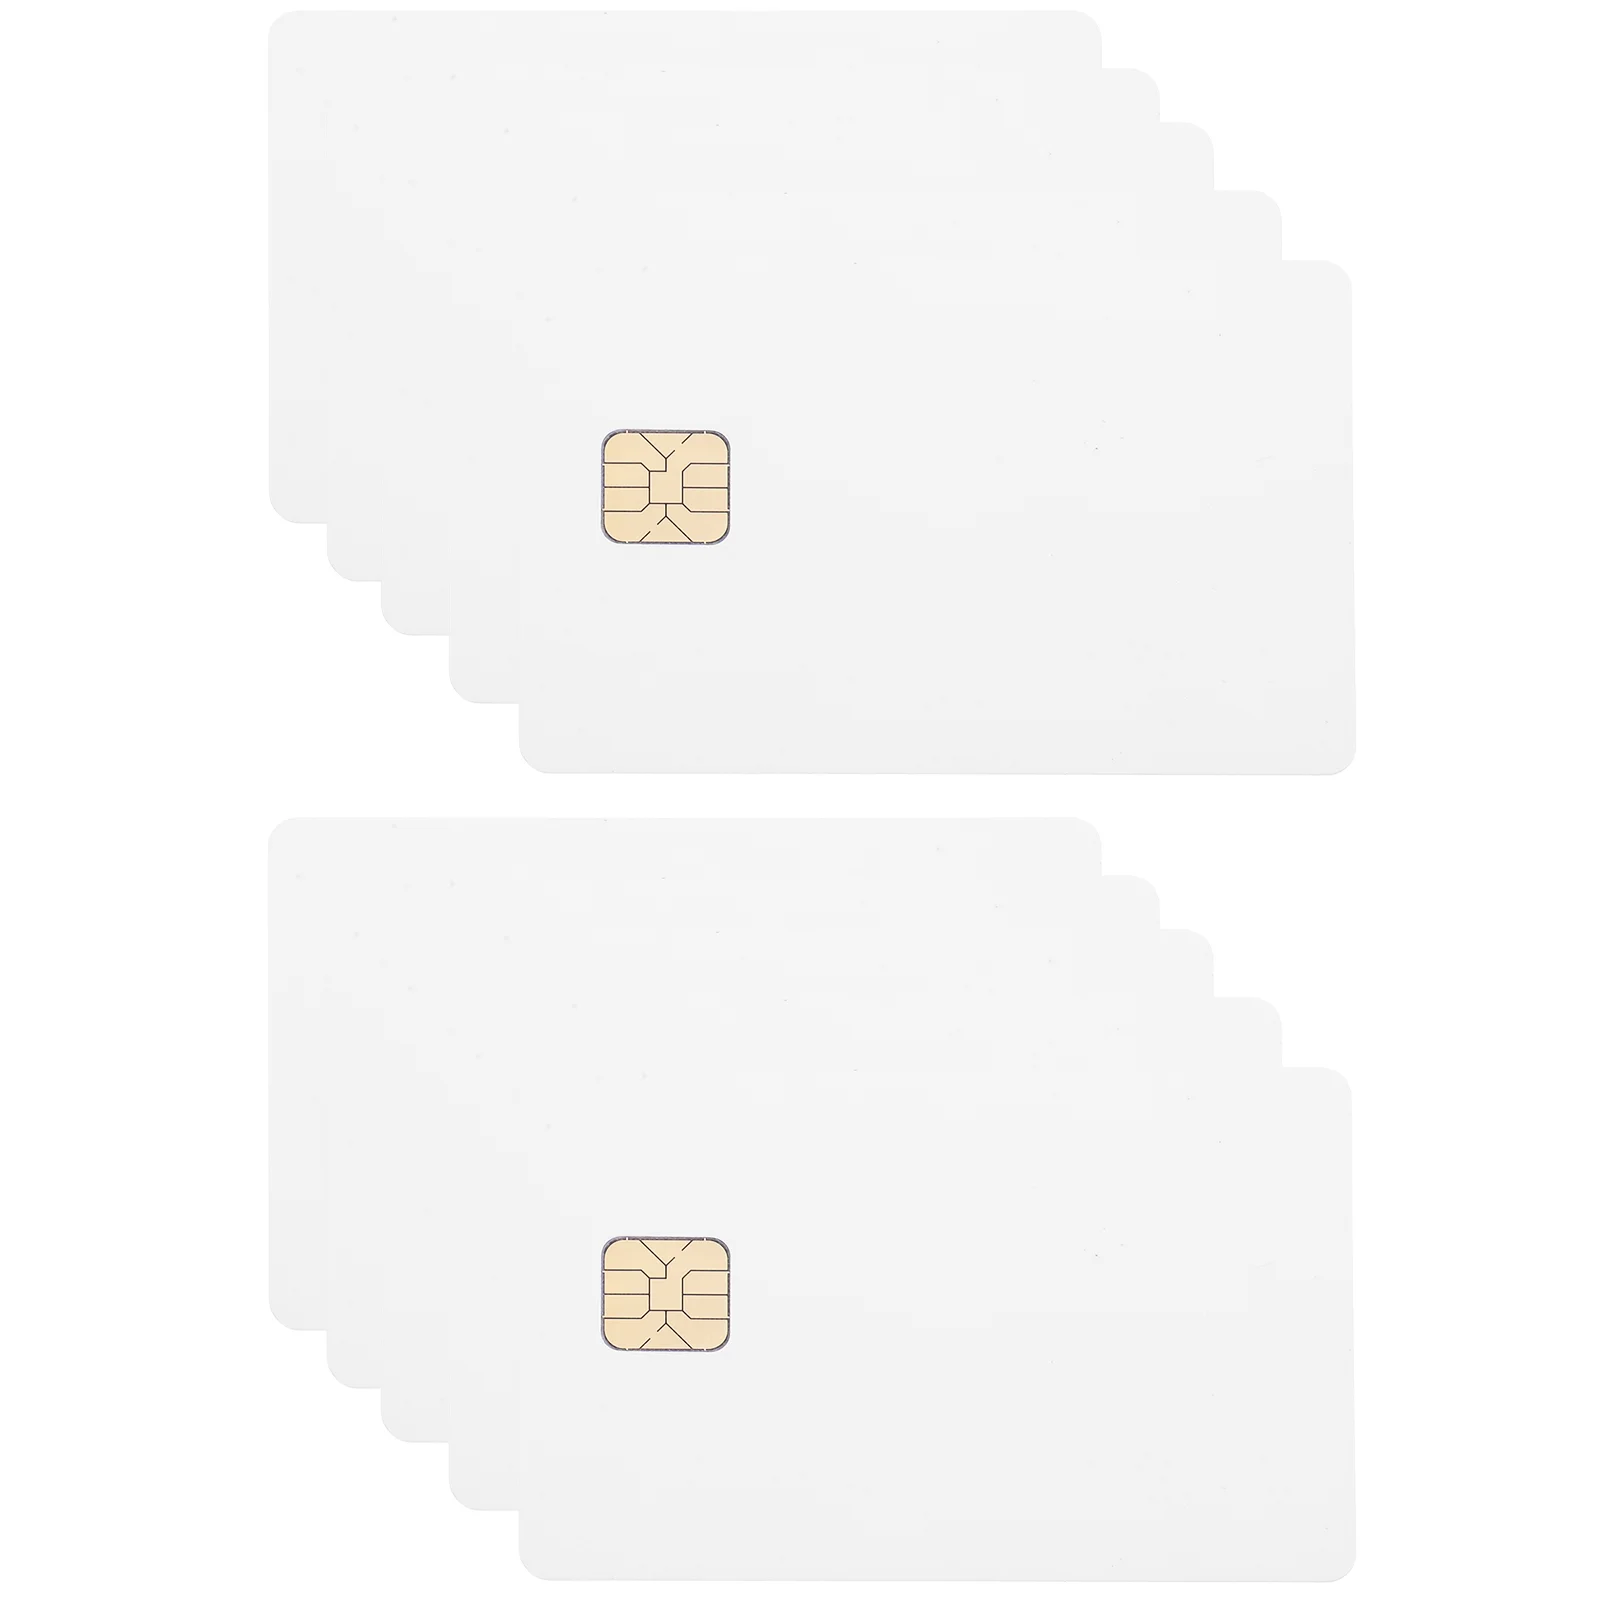 

10 Pcs Blank Credit Cards Clone Smart IC White Intelligent Pvc Access Control System Copper Chip Hotel